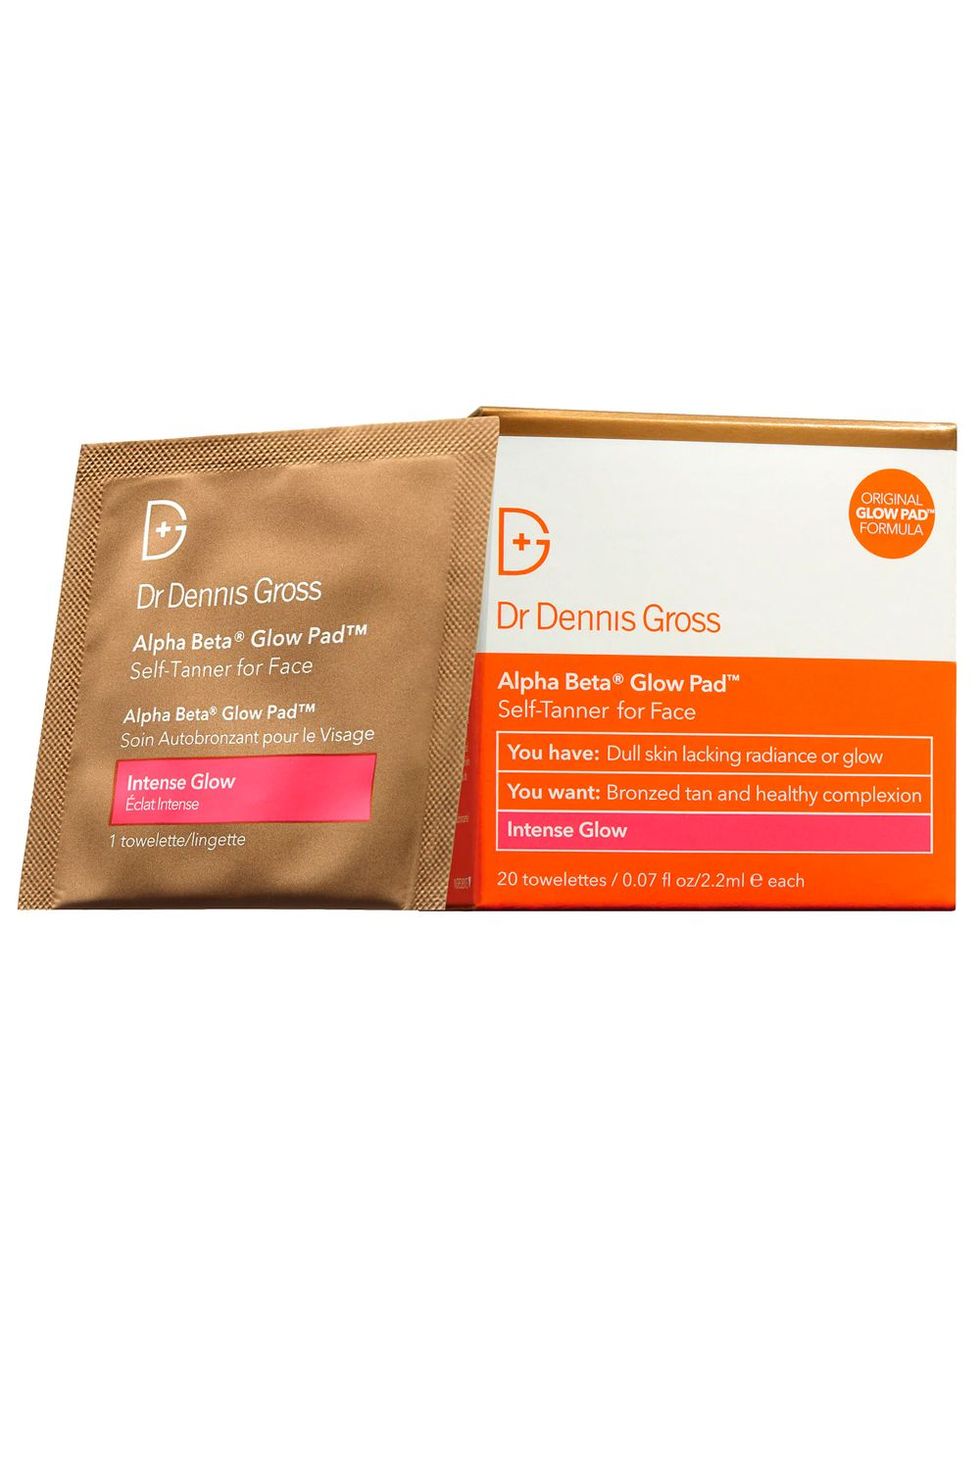 Dr. Dennis Gross Alpha Beta Glow Pad Self-Tanner for Face